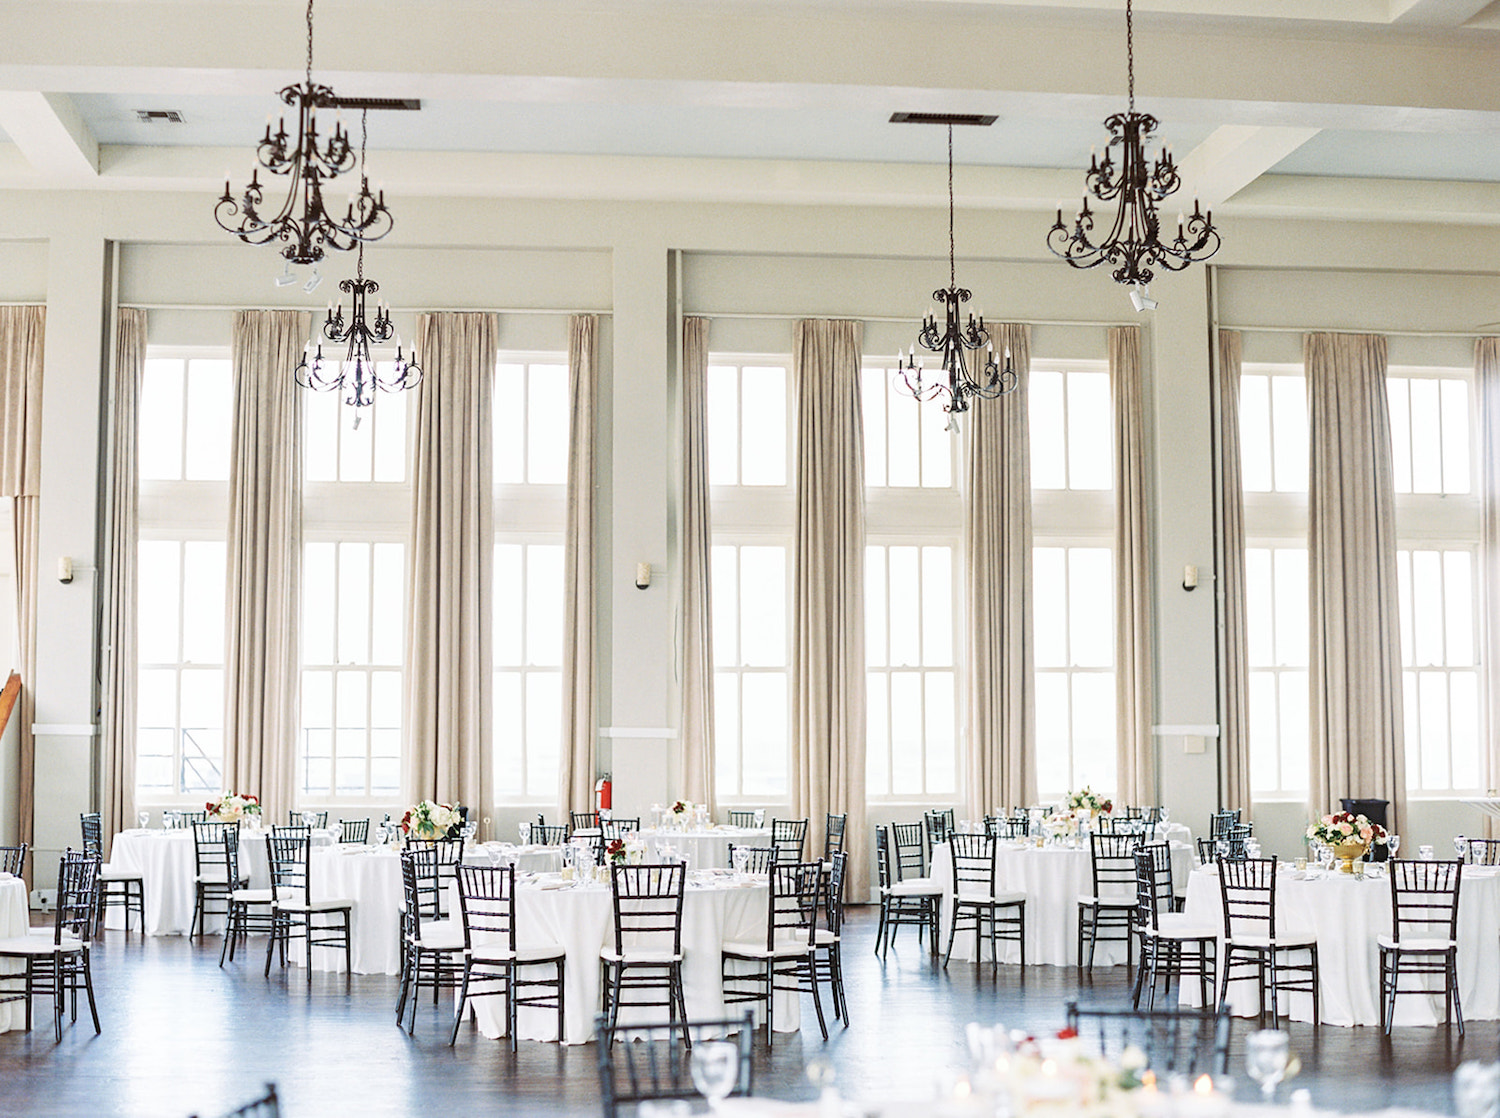 The interior of The Room on Main used as a wedding reception venue, photographed by Mackenzie Reiter